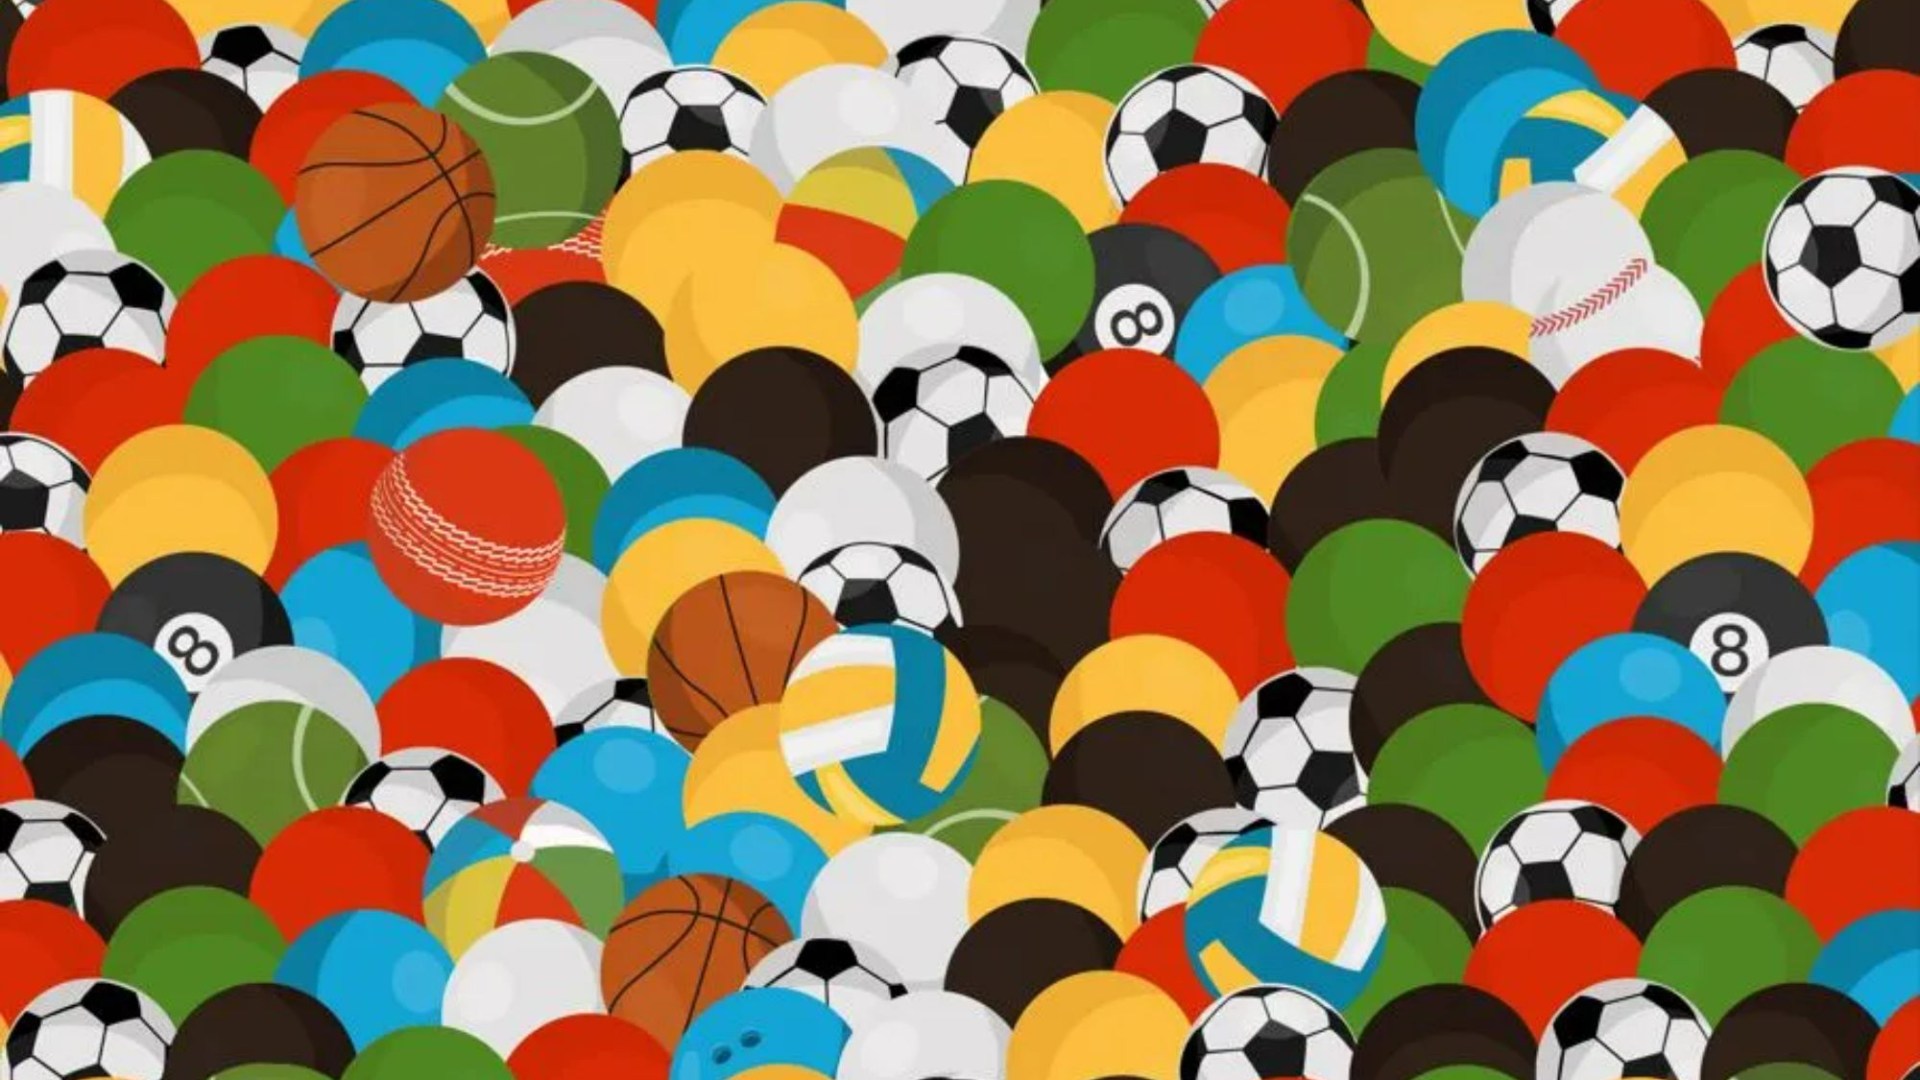 You have the eyes of a hawk if you can spot all of the footballs in this image in less than 25 seconds